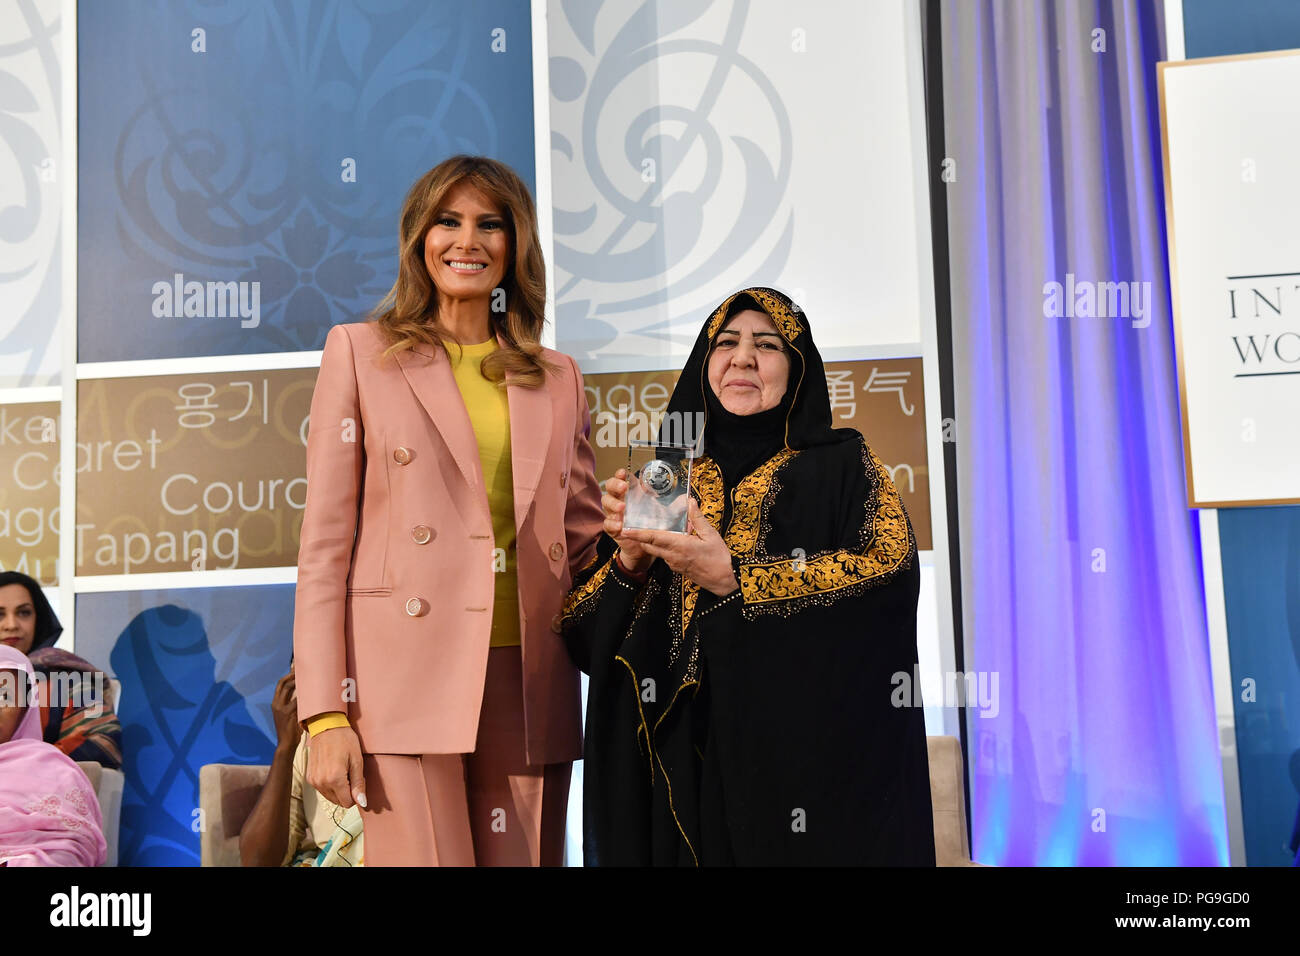 First Lady of the United States Melania Trump presents the 2018  International Women of Courage (IWOC) Award to Aliyah Khalaf Saleh of Iraq  during a ceremony at the U.S. Department of State